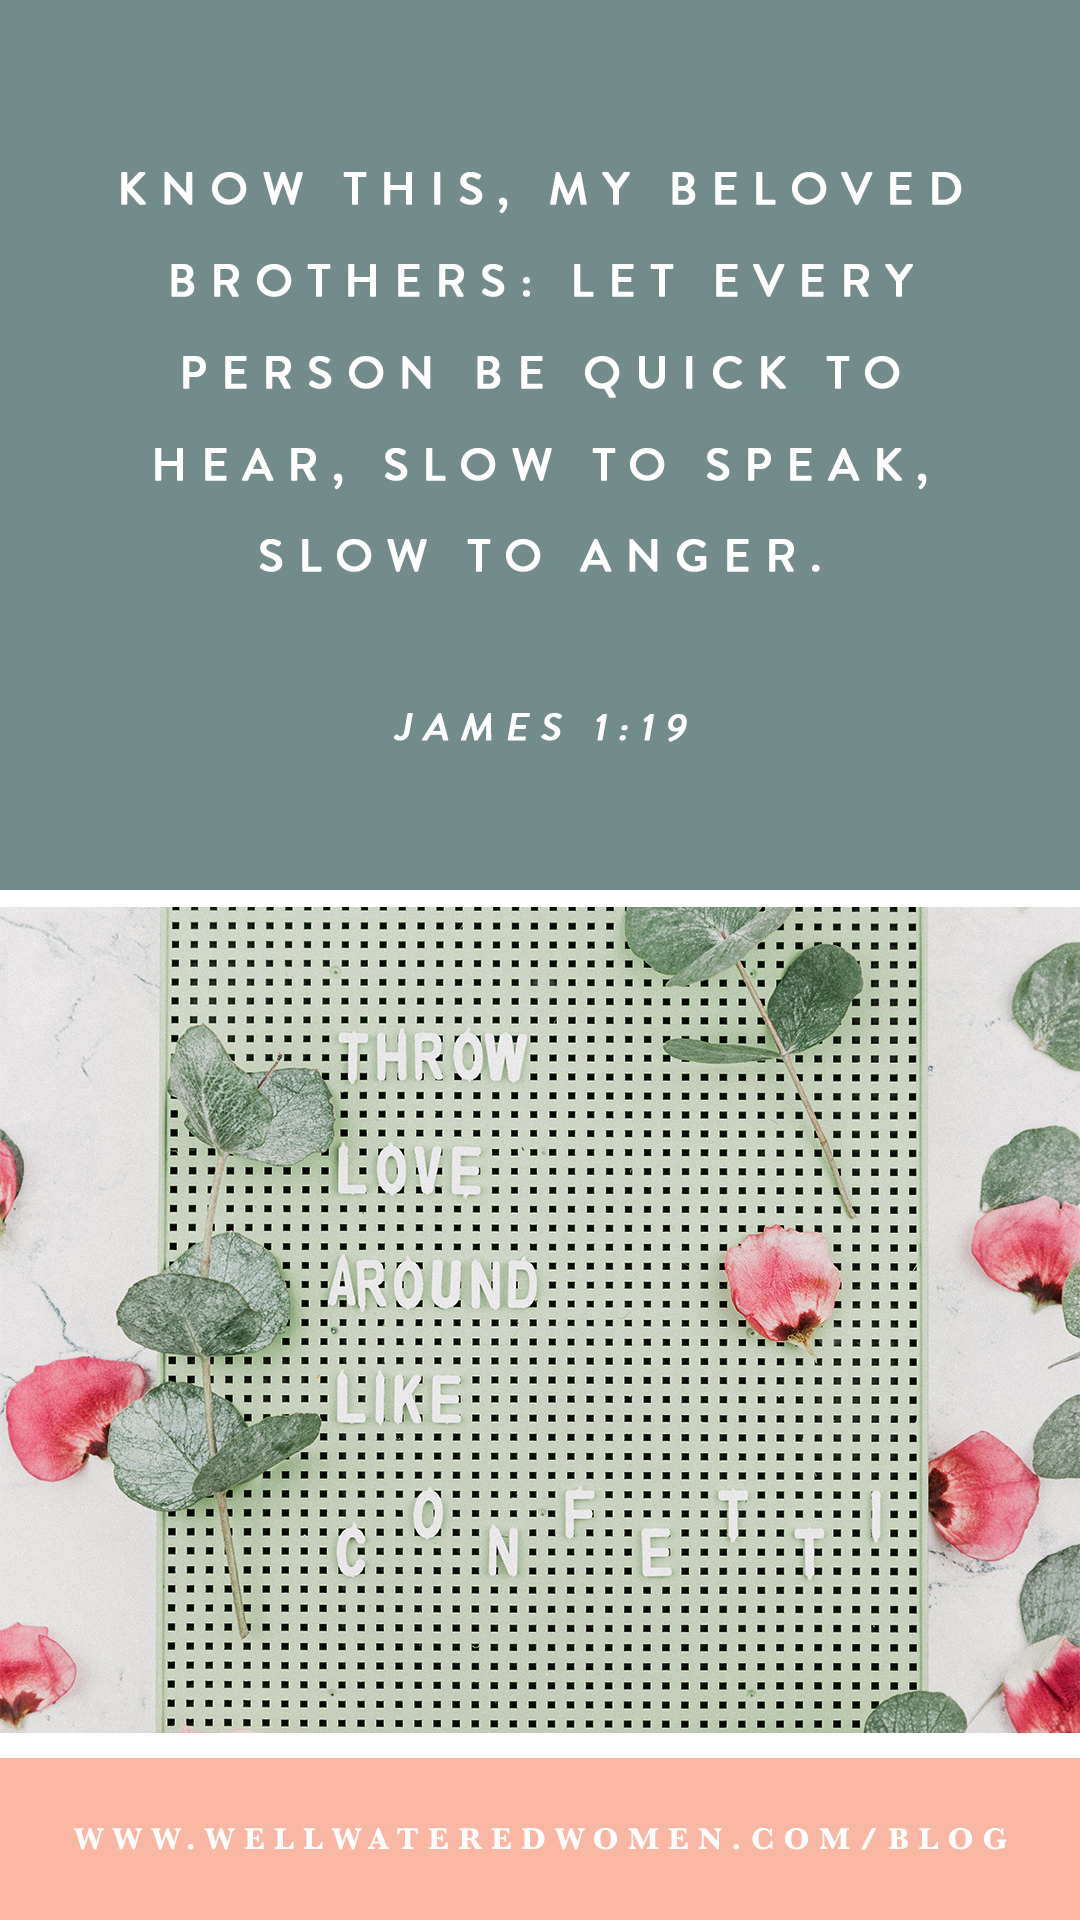 “Know this, my beloved brothers: let every person be quick to hear, slow to speak, slow to anger” (James 1:19). Money, Marriage, and Making Room for Another’s Interests: Well-Watered Women.